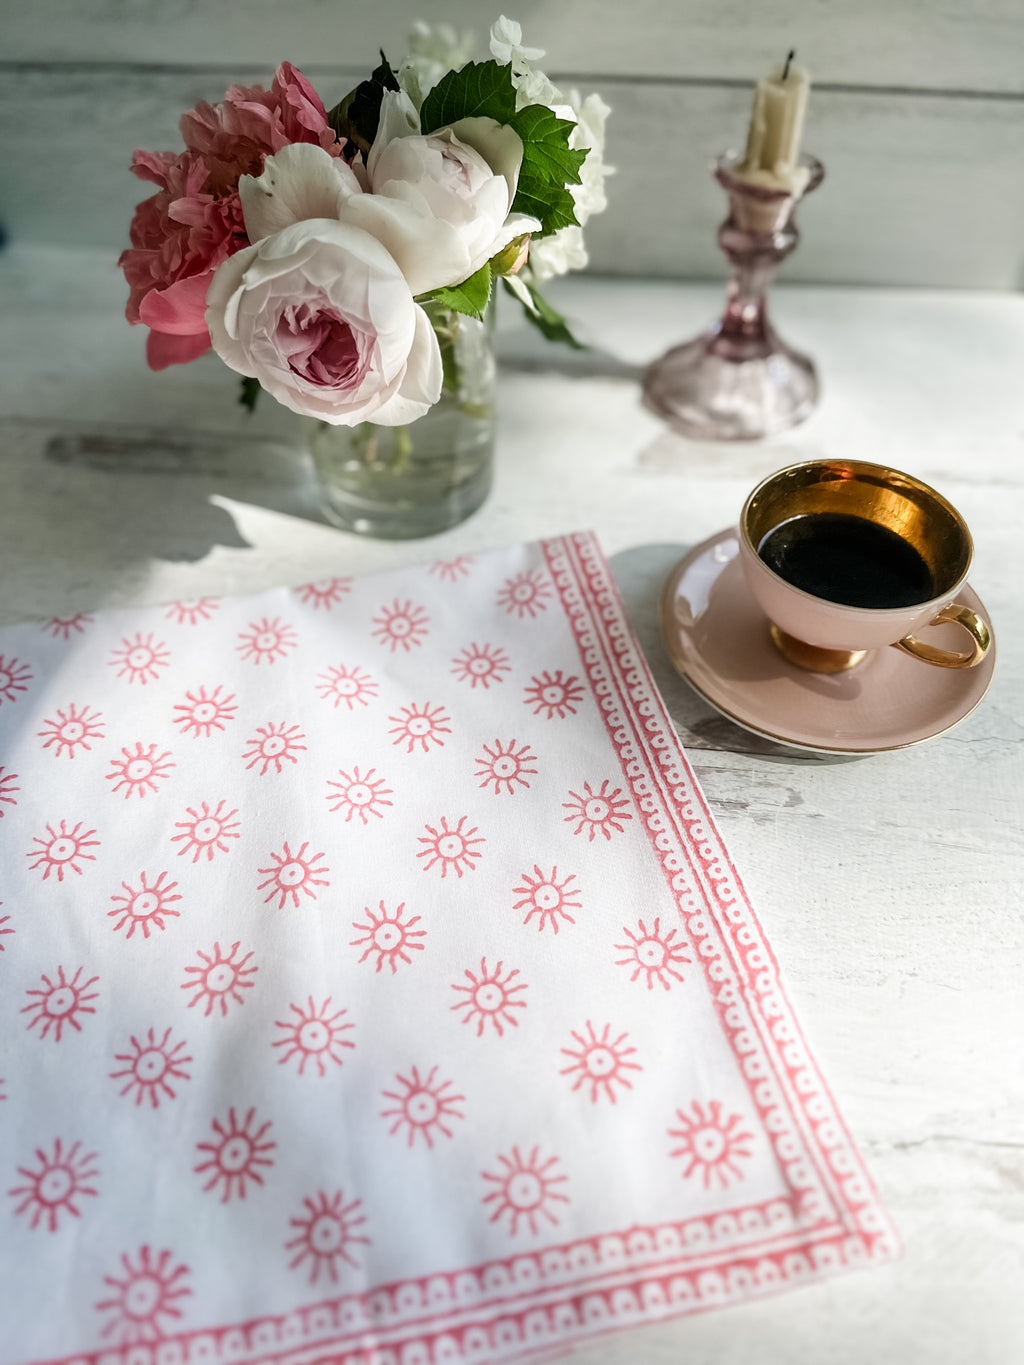 Here Comes the Sun Napkins in Kestrel Pink - set of 4